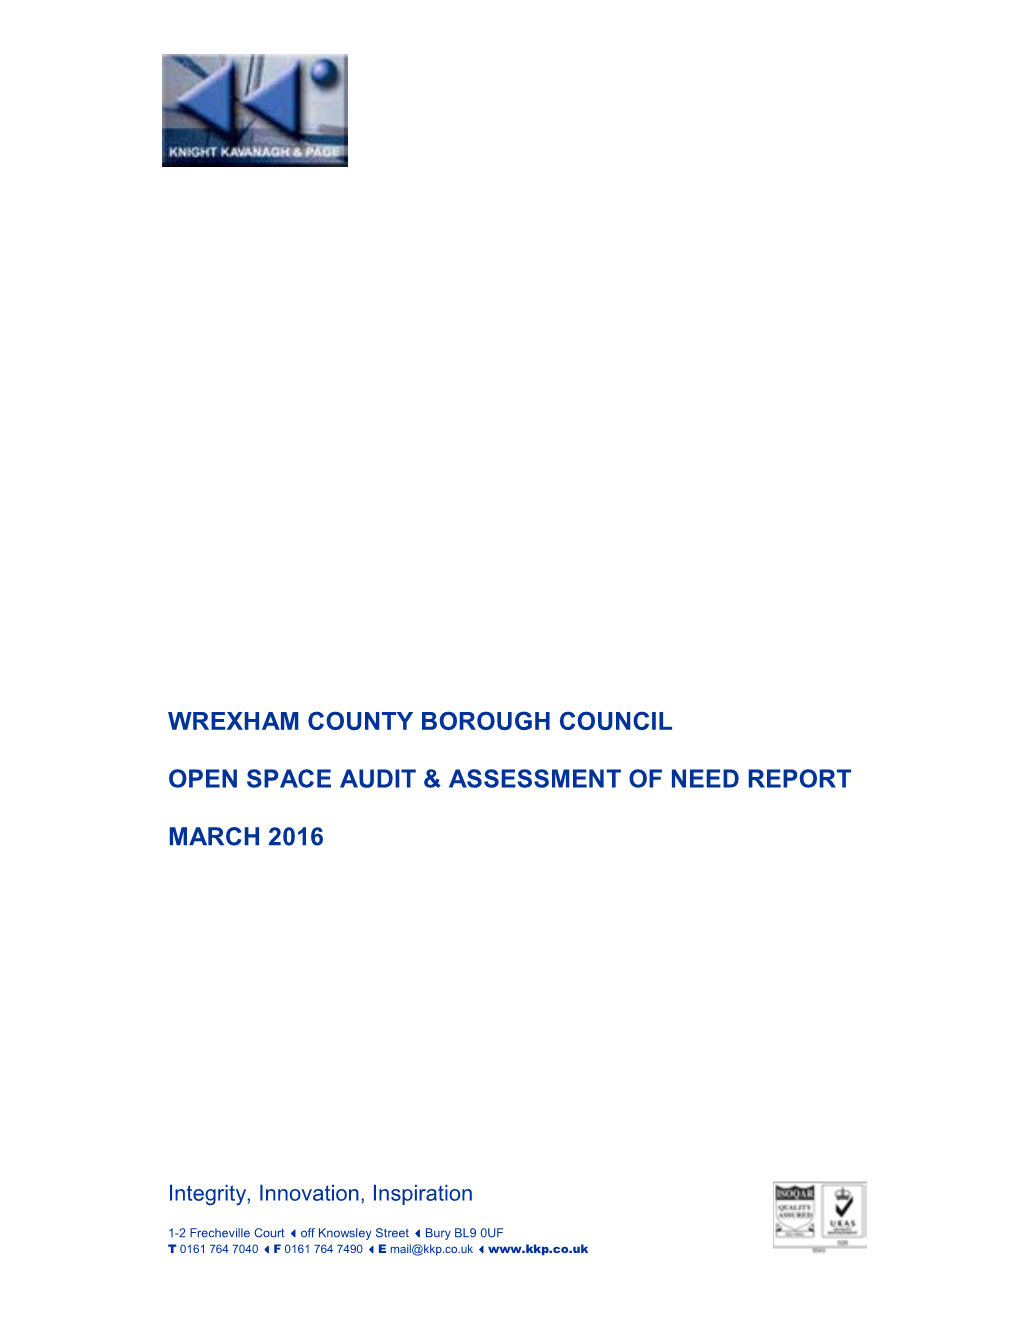 Wrexham County Borough Council Open Space Audit & Assessment of Need Report March 2016